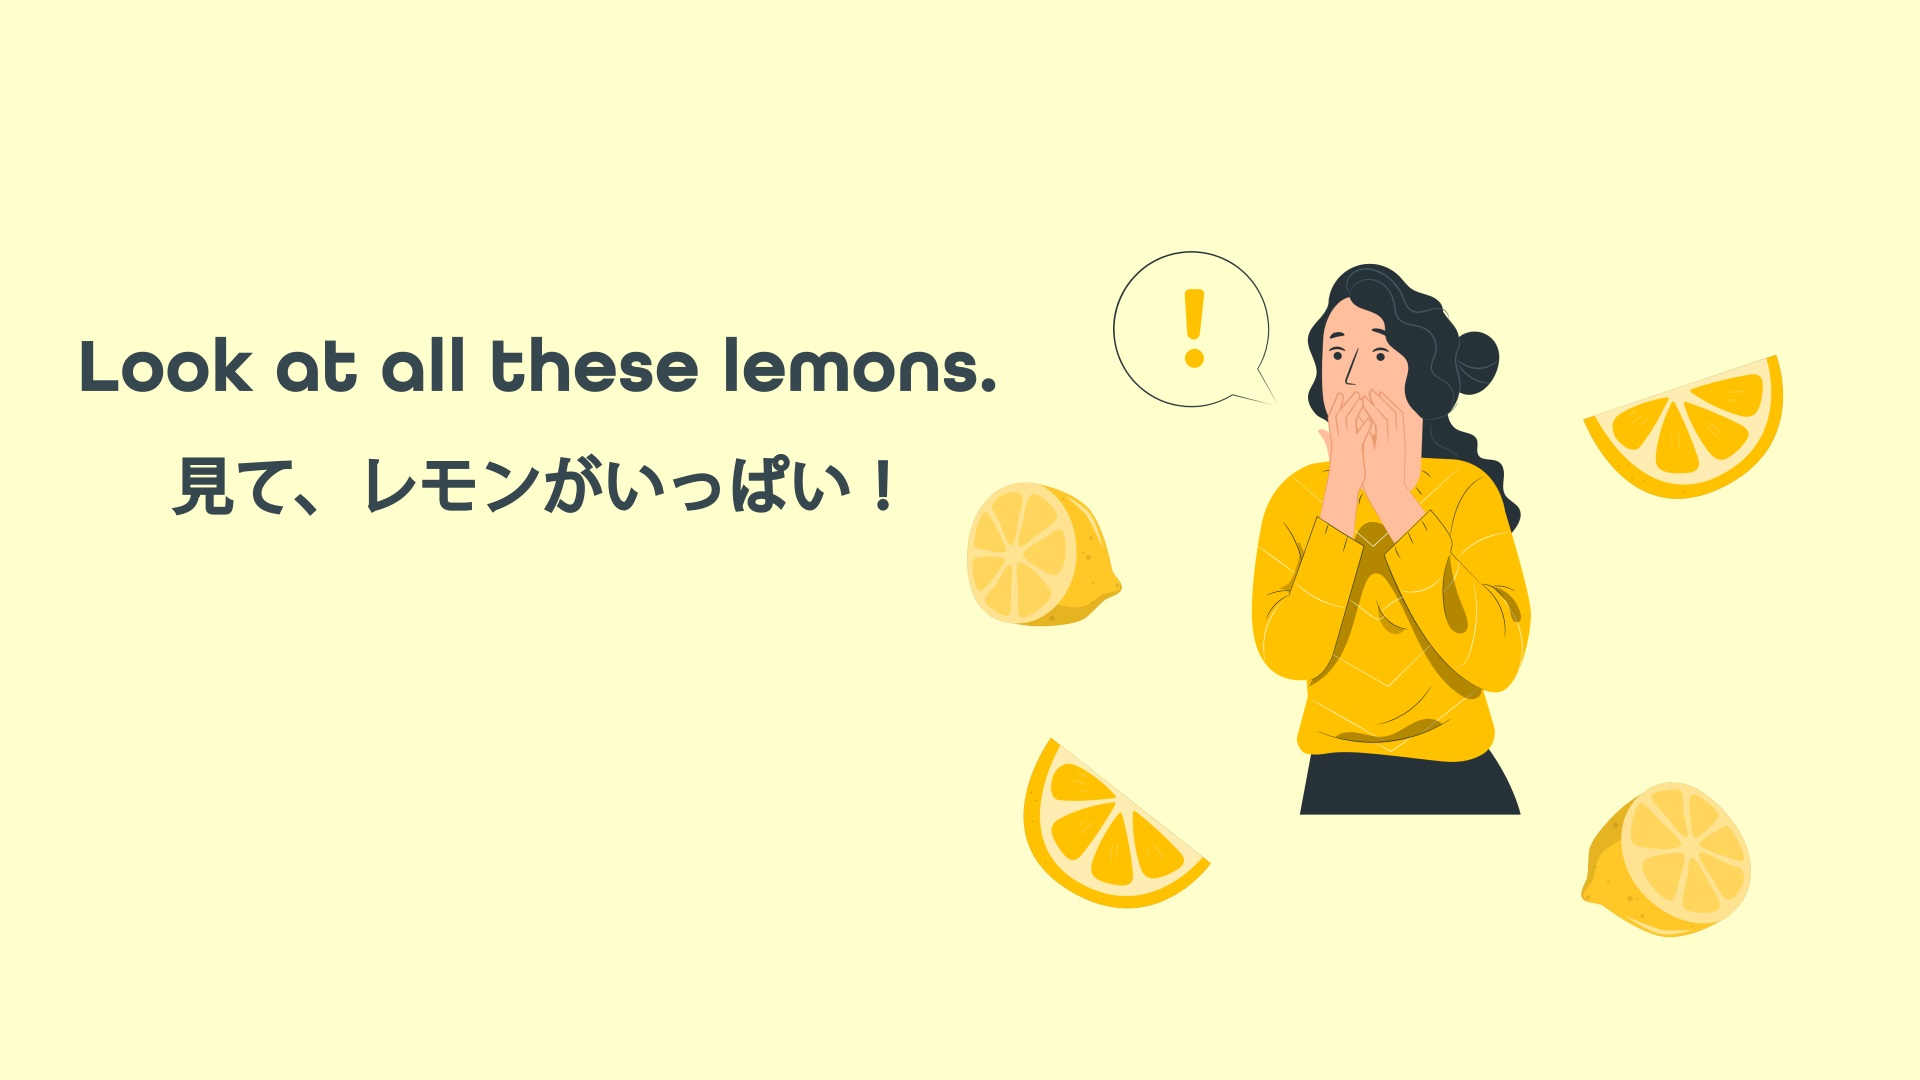 Featured image for “Look at all these lemons. 見て、レモンがいっぱい！”